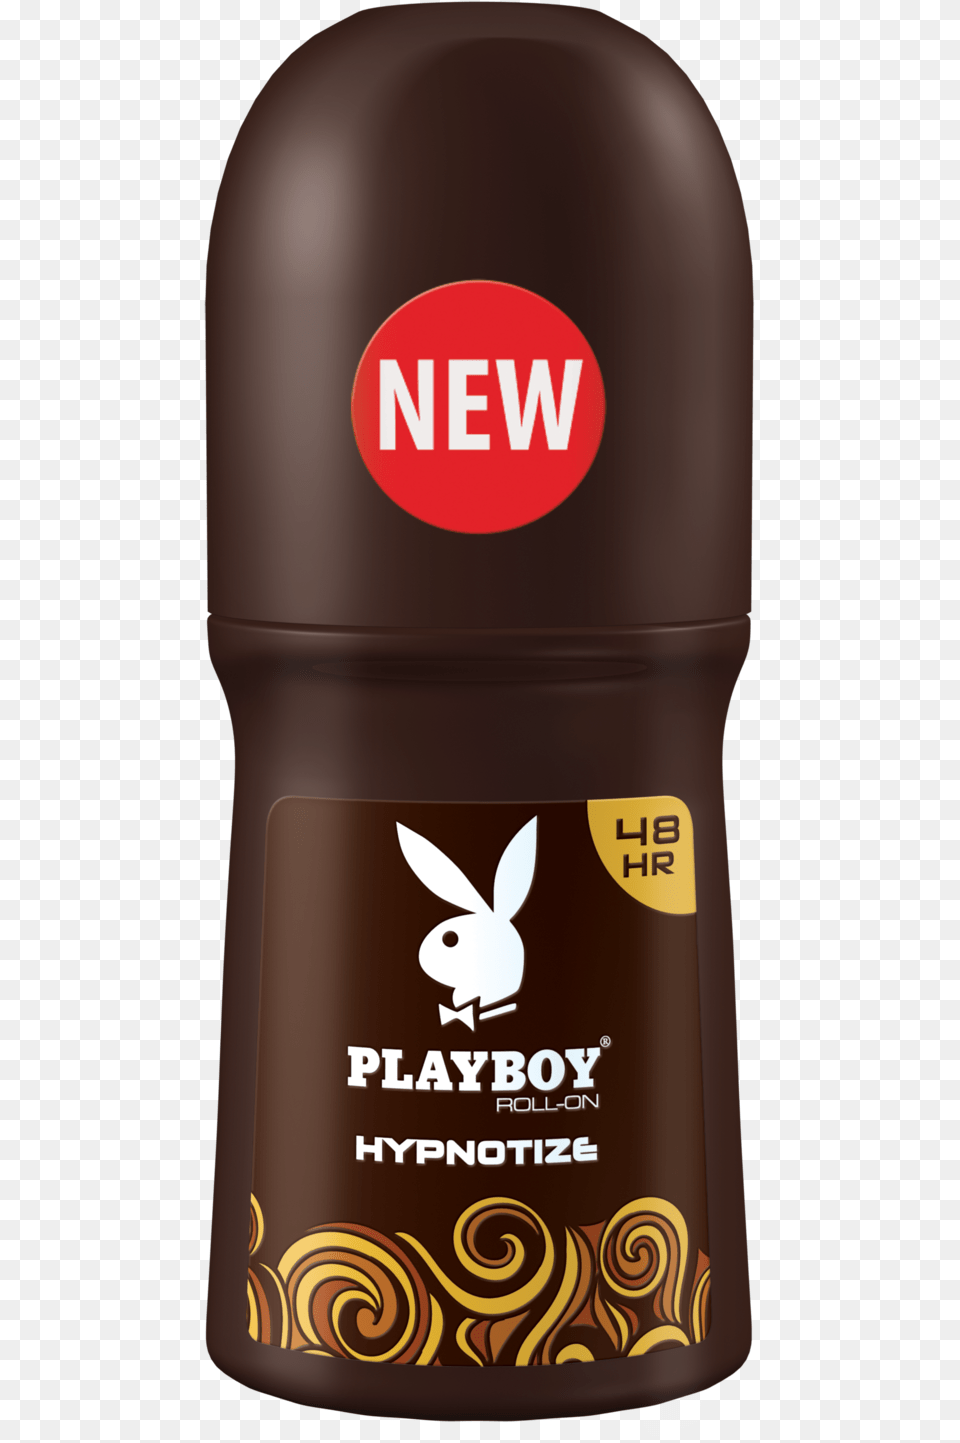 Playboy Roll Playboy Roll On Code Black, Cosmetics, Deodorant, Can, Tin Png Image